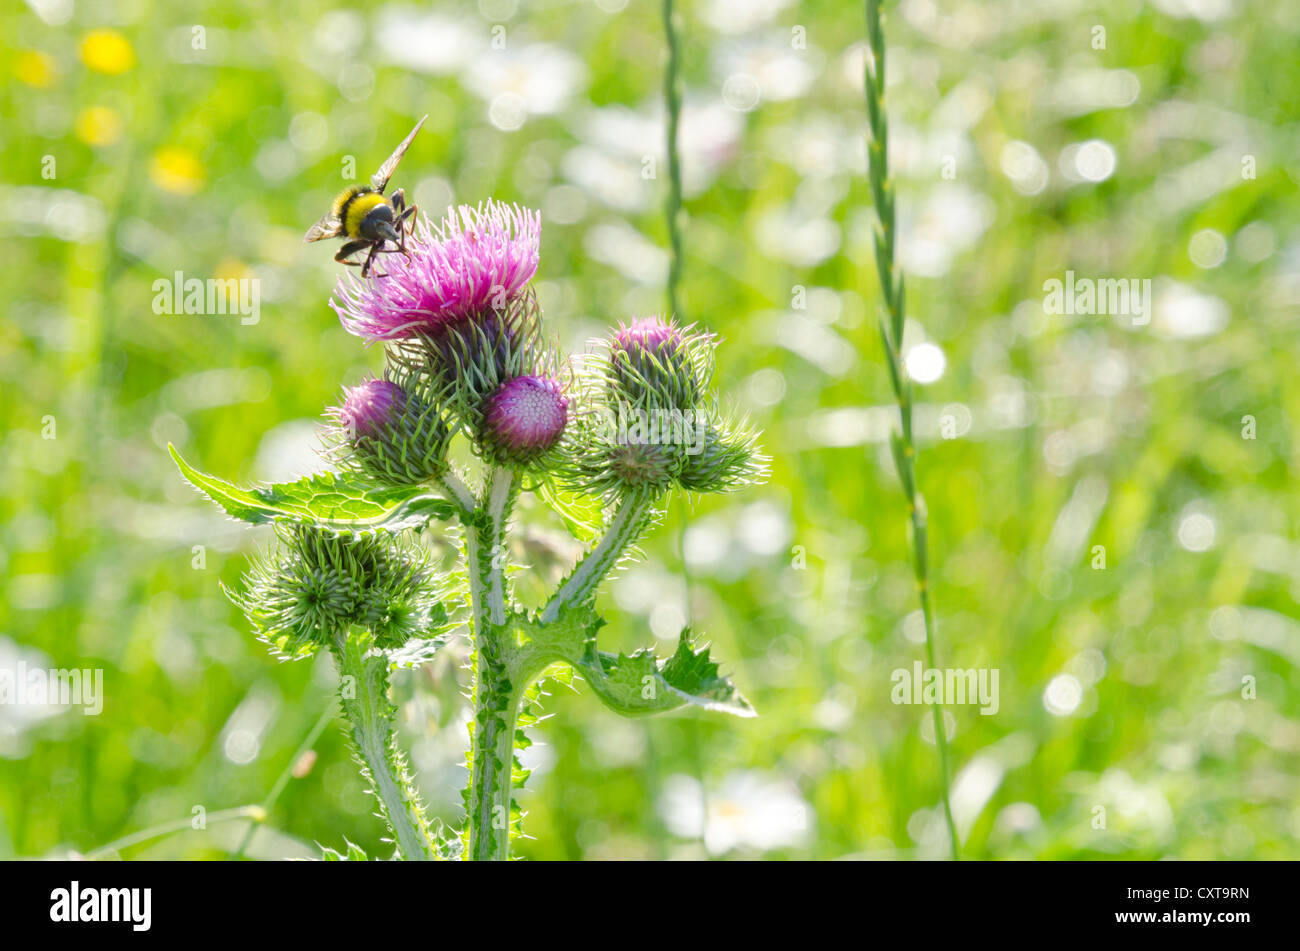 Welted thistle (Carduus crispus) on a meadow Stock Photo